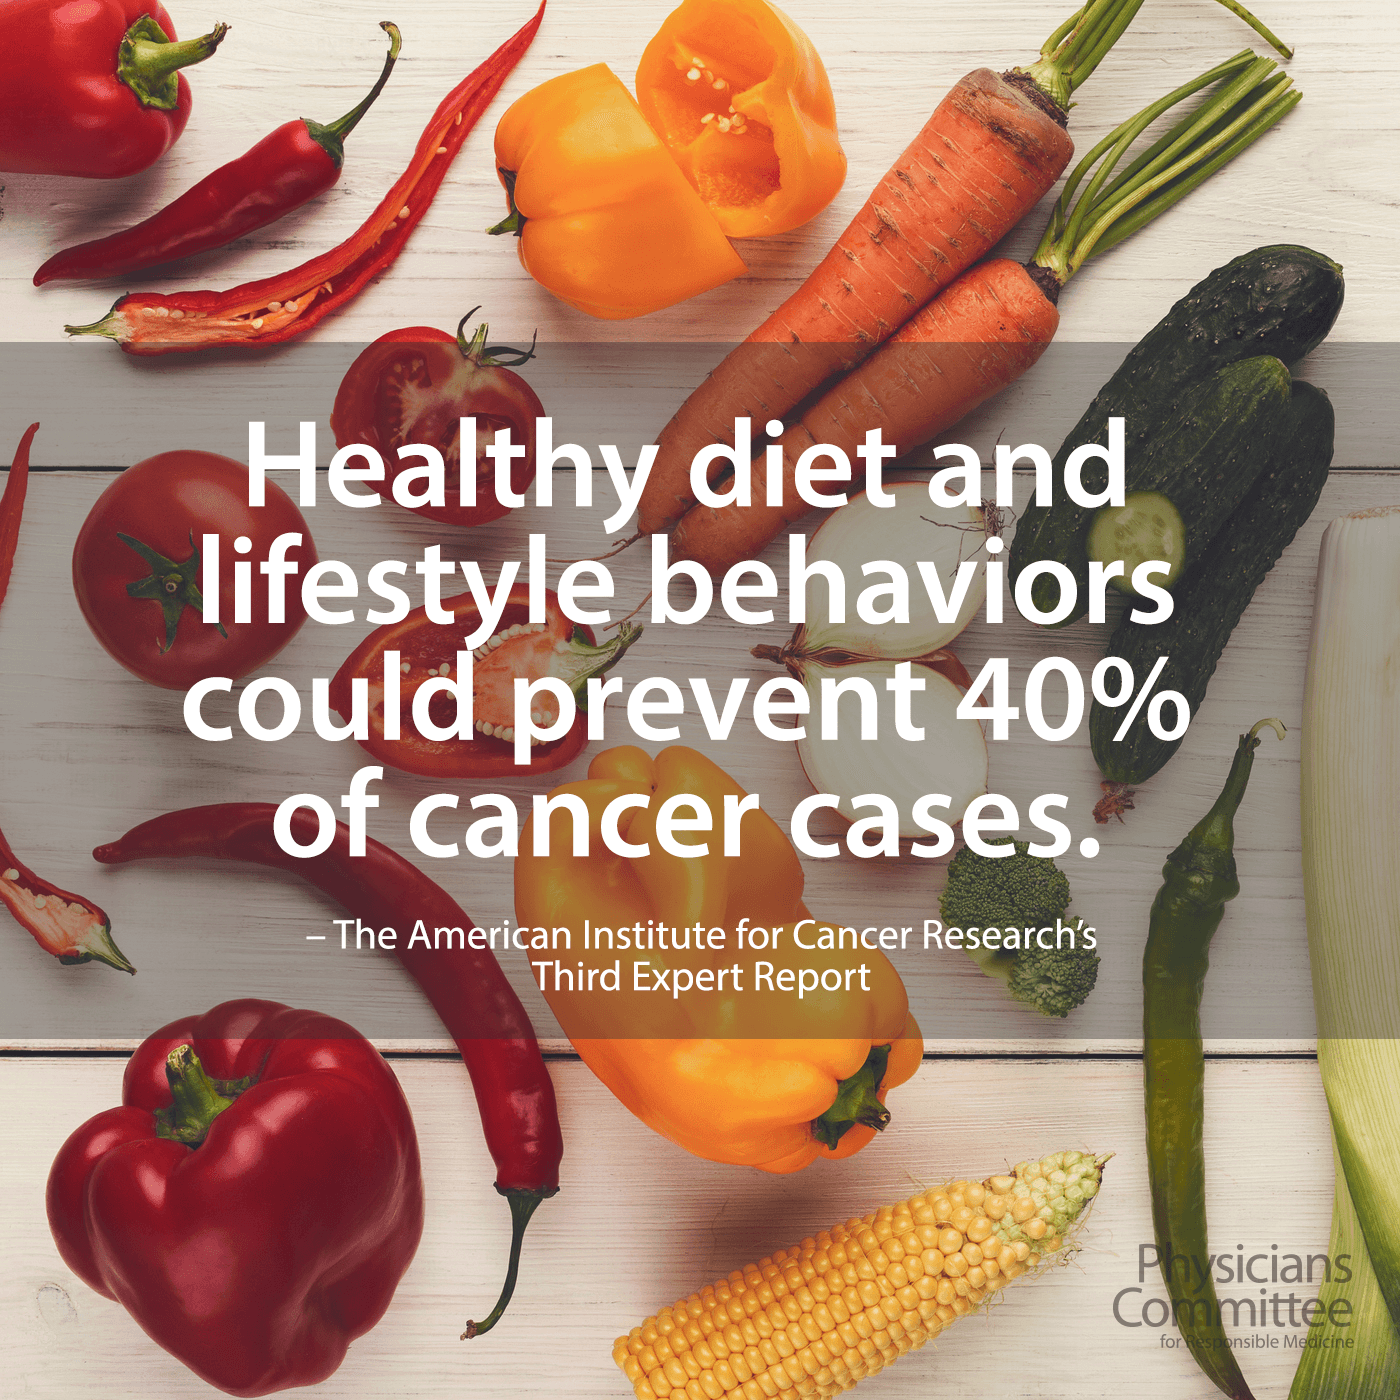 Reduce Cancer Risk with Plant-Based Foods